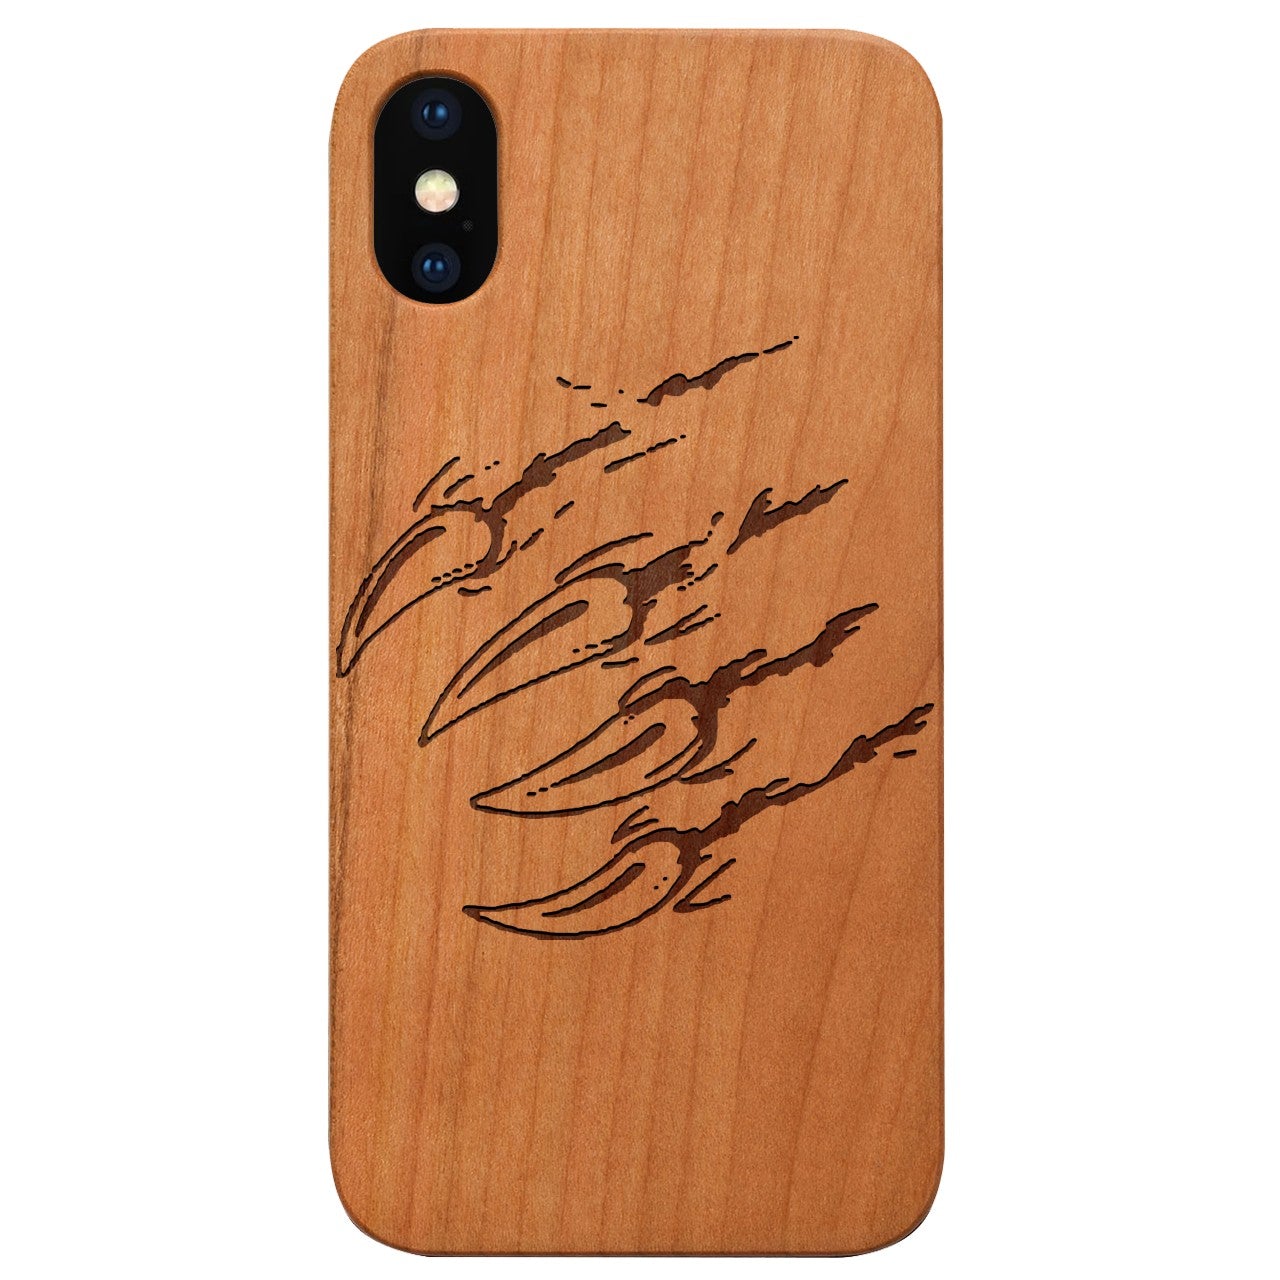  Bear Claw - Engraved - Wooden Phone Case - IPhone 13 Models